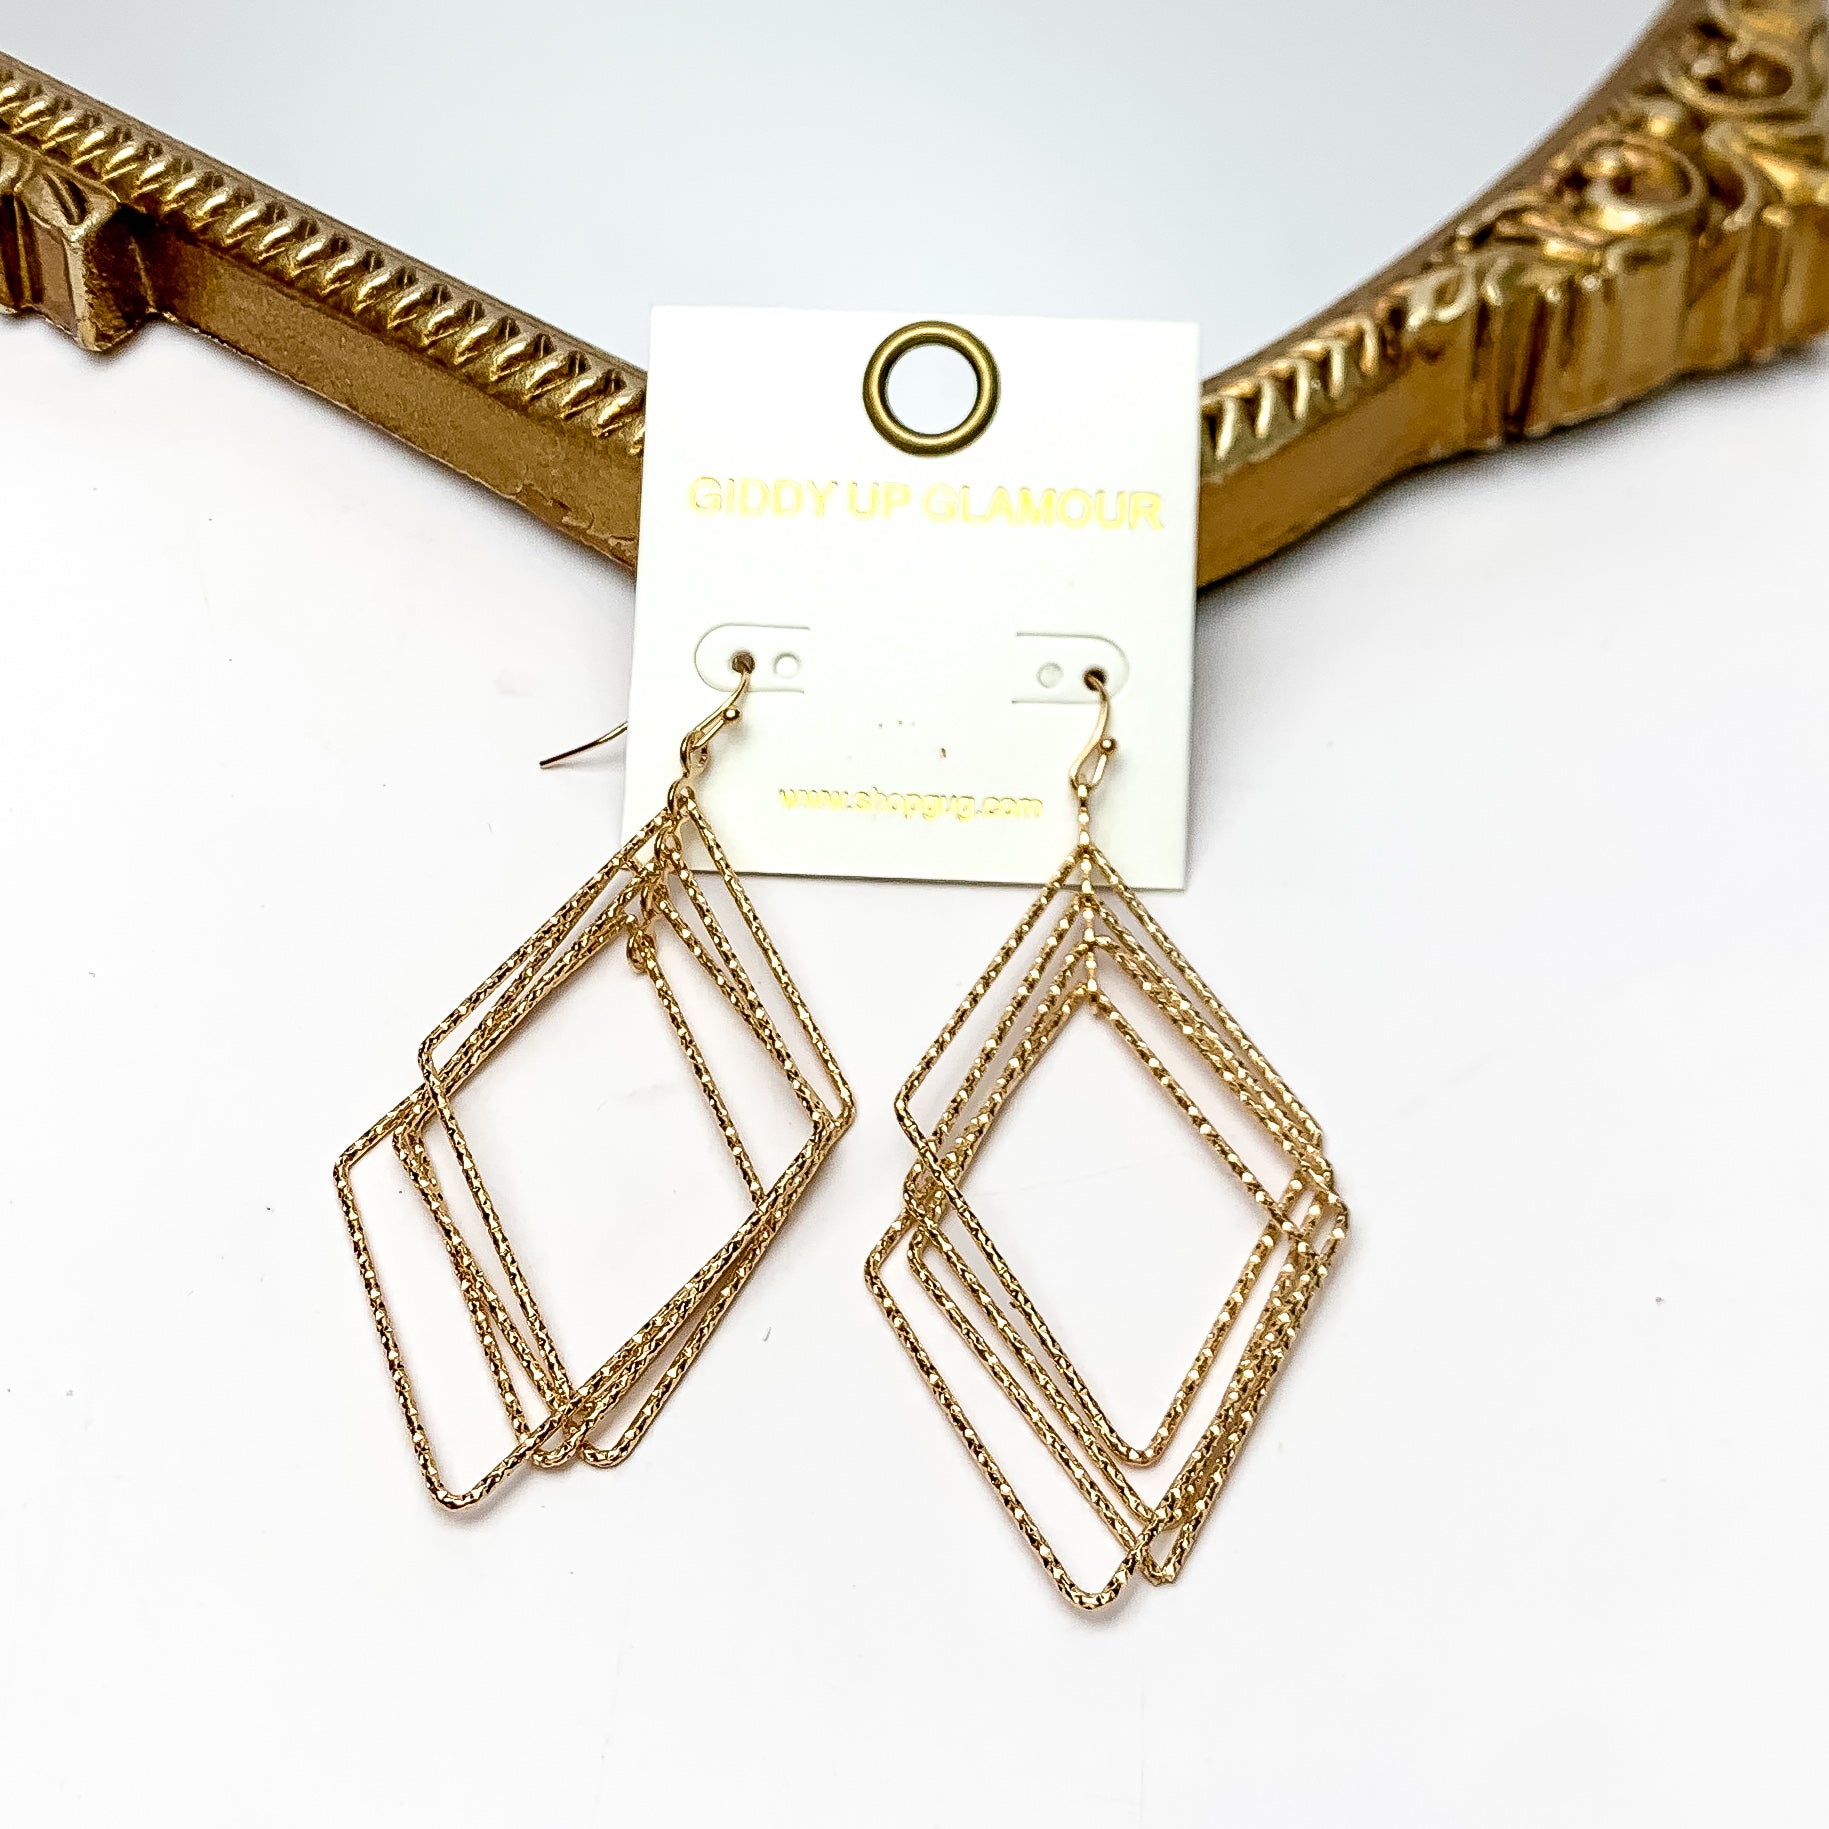 Multiple layered Diamond Shaped Earrings in Gold Tone. These earrings are pictured on a white background with a gold frame around.